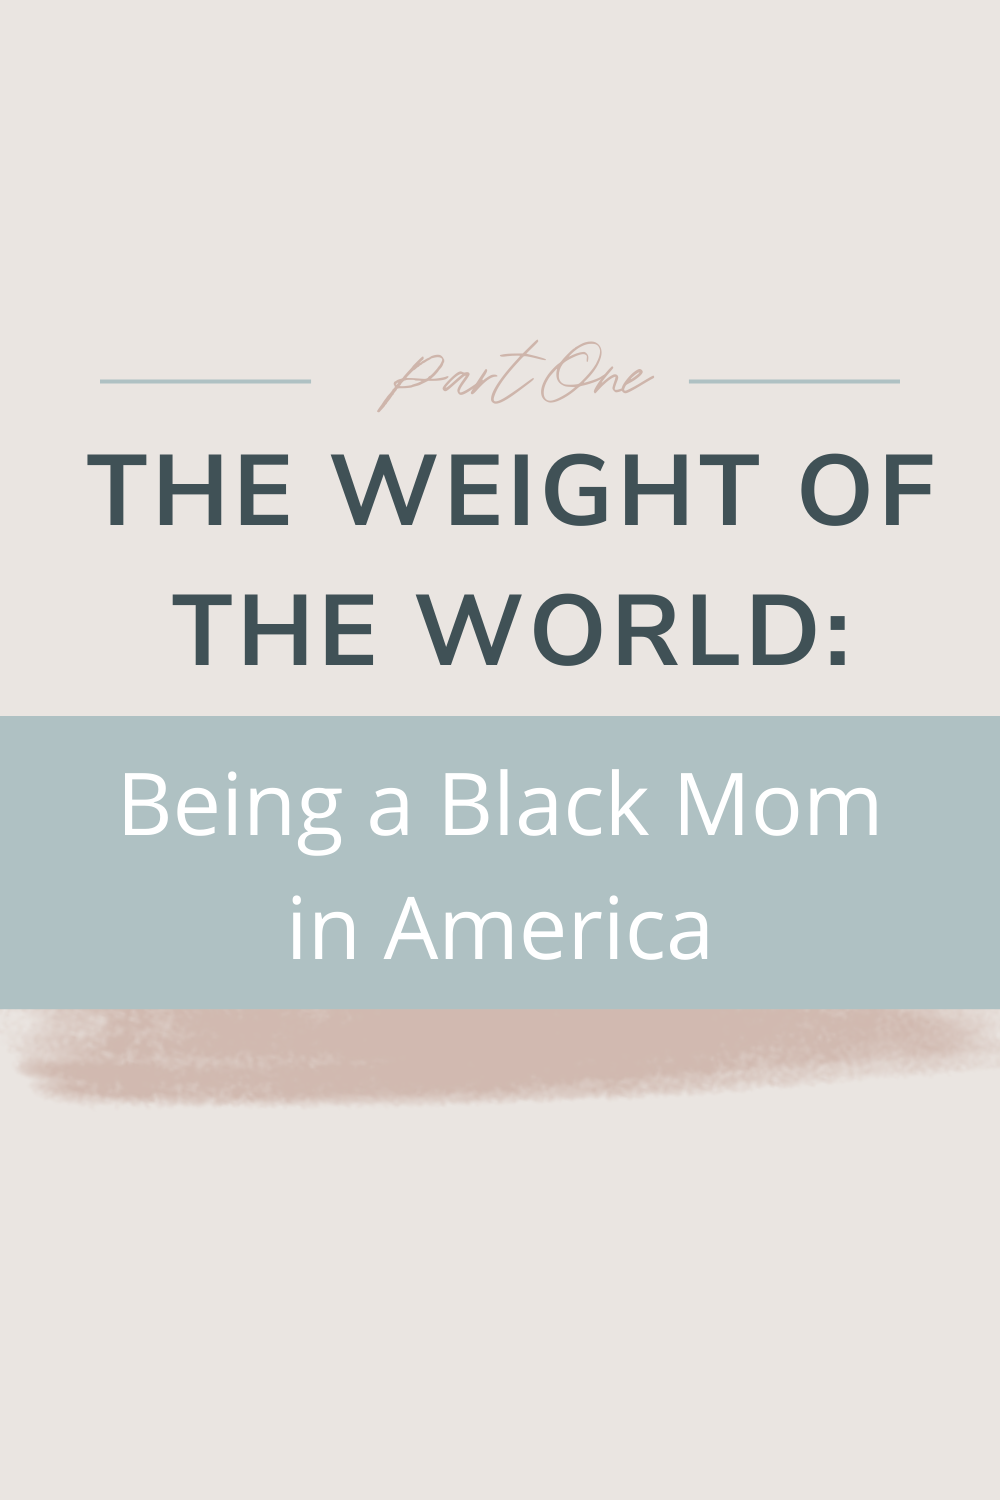 The Weight of the World: Being a Black Mom in America | This blog begins to unpack the challenges associated with being a Black mother in America. In support of black lives matter and the justice Black mothers deserve, this blog begins to unpack the systemic challenges these women experience.